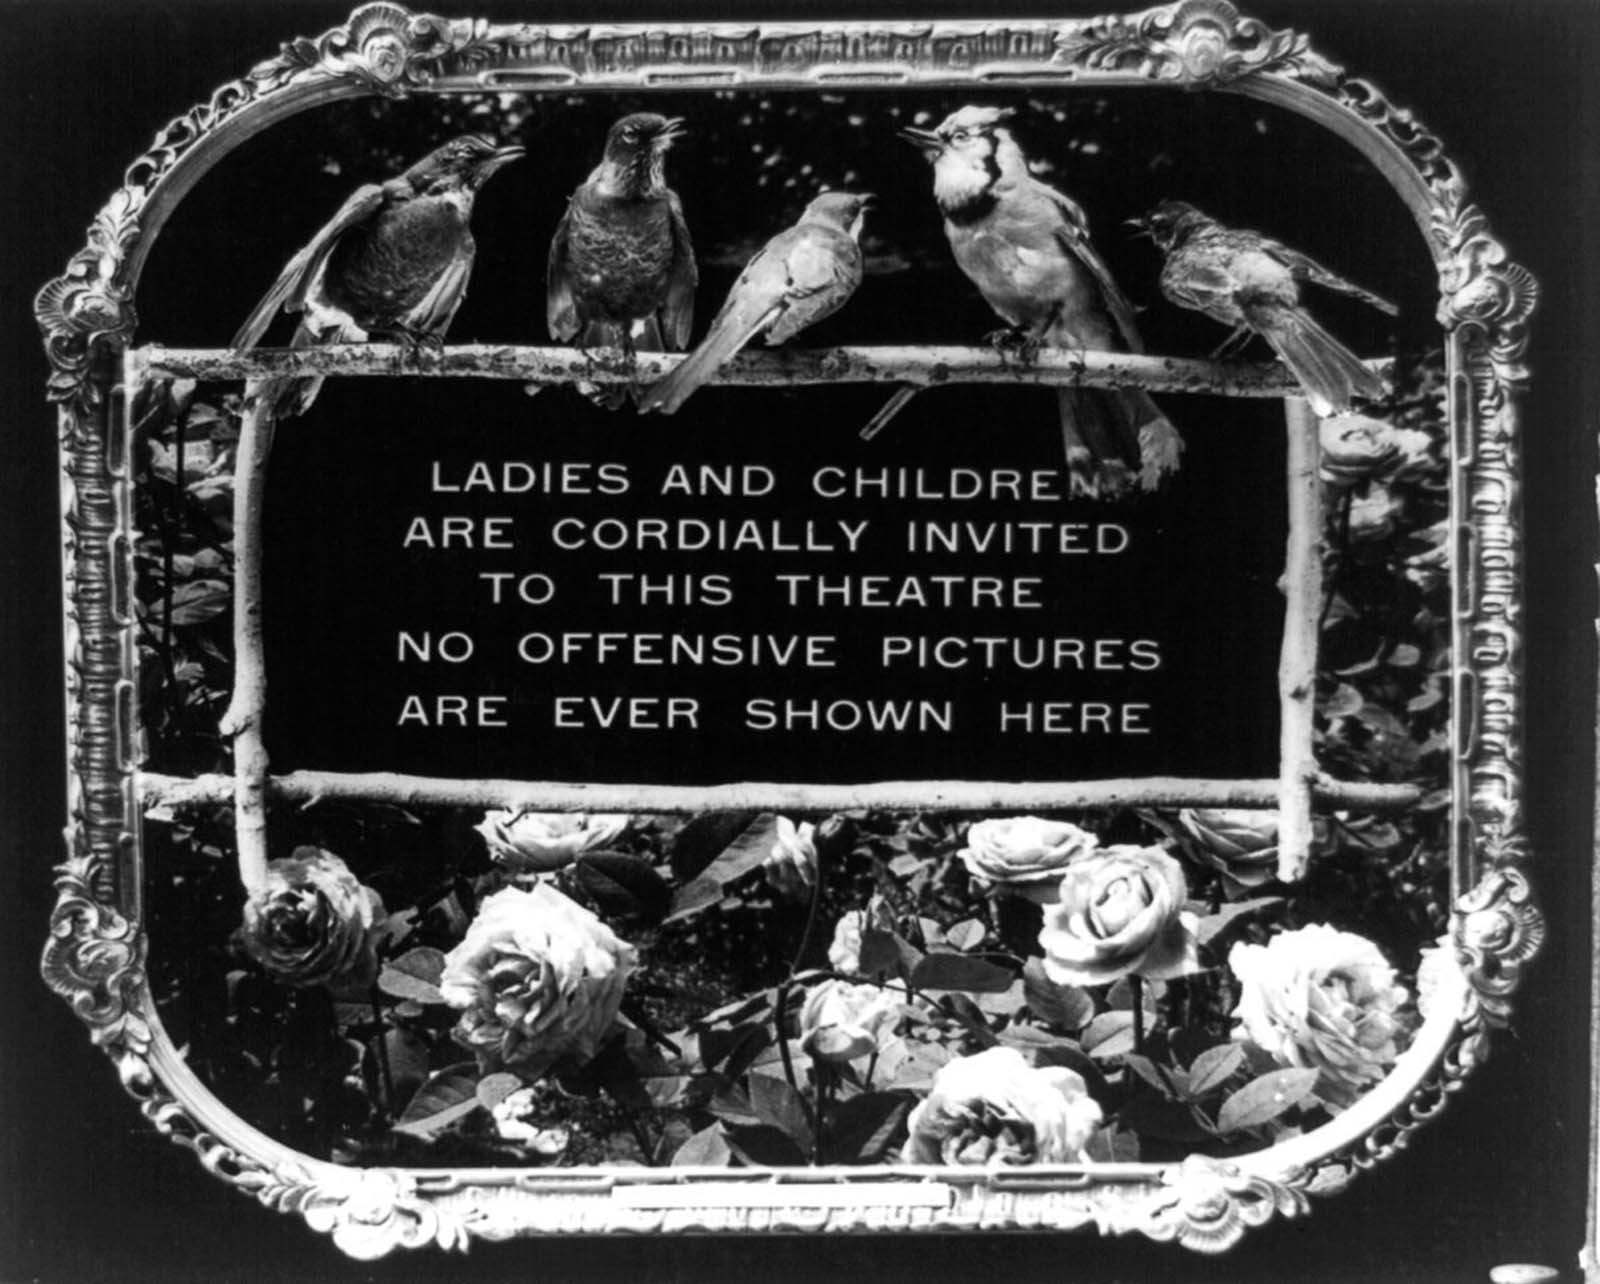 This slider was used to remind parents that children and women are ‘cordially’ invited to watch the film and reassured them ‘no offensive pictures’ are even shown inside the theater.